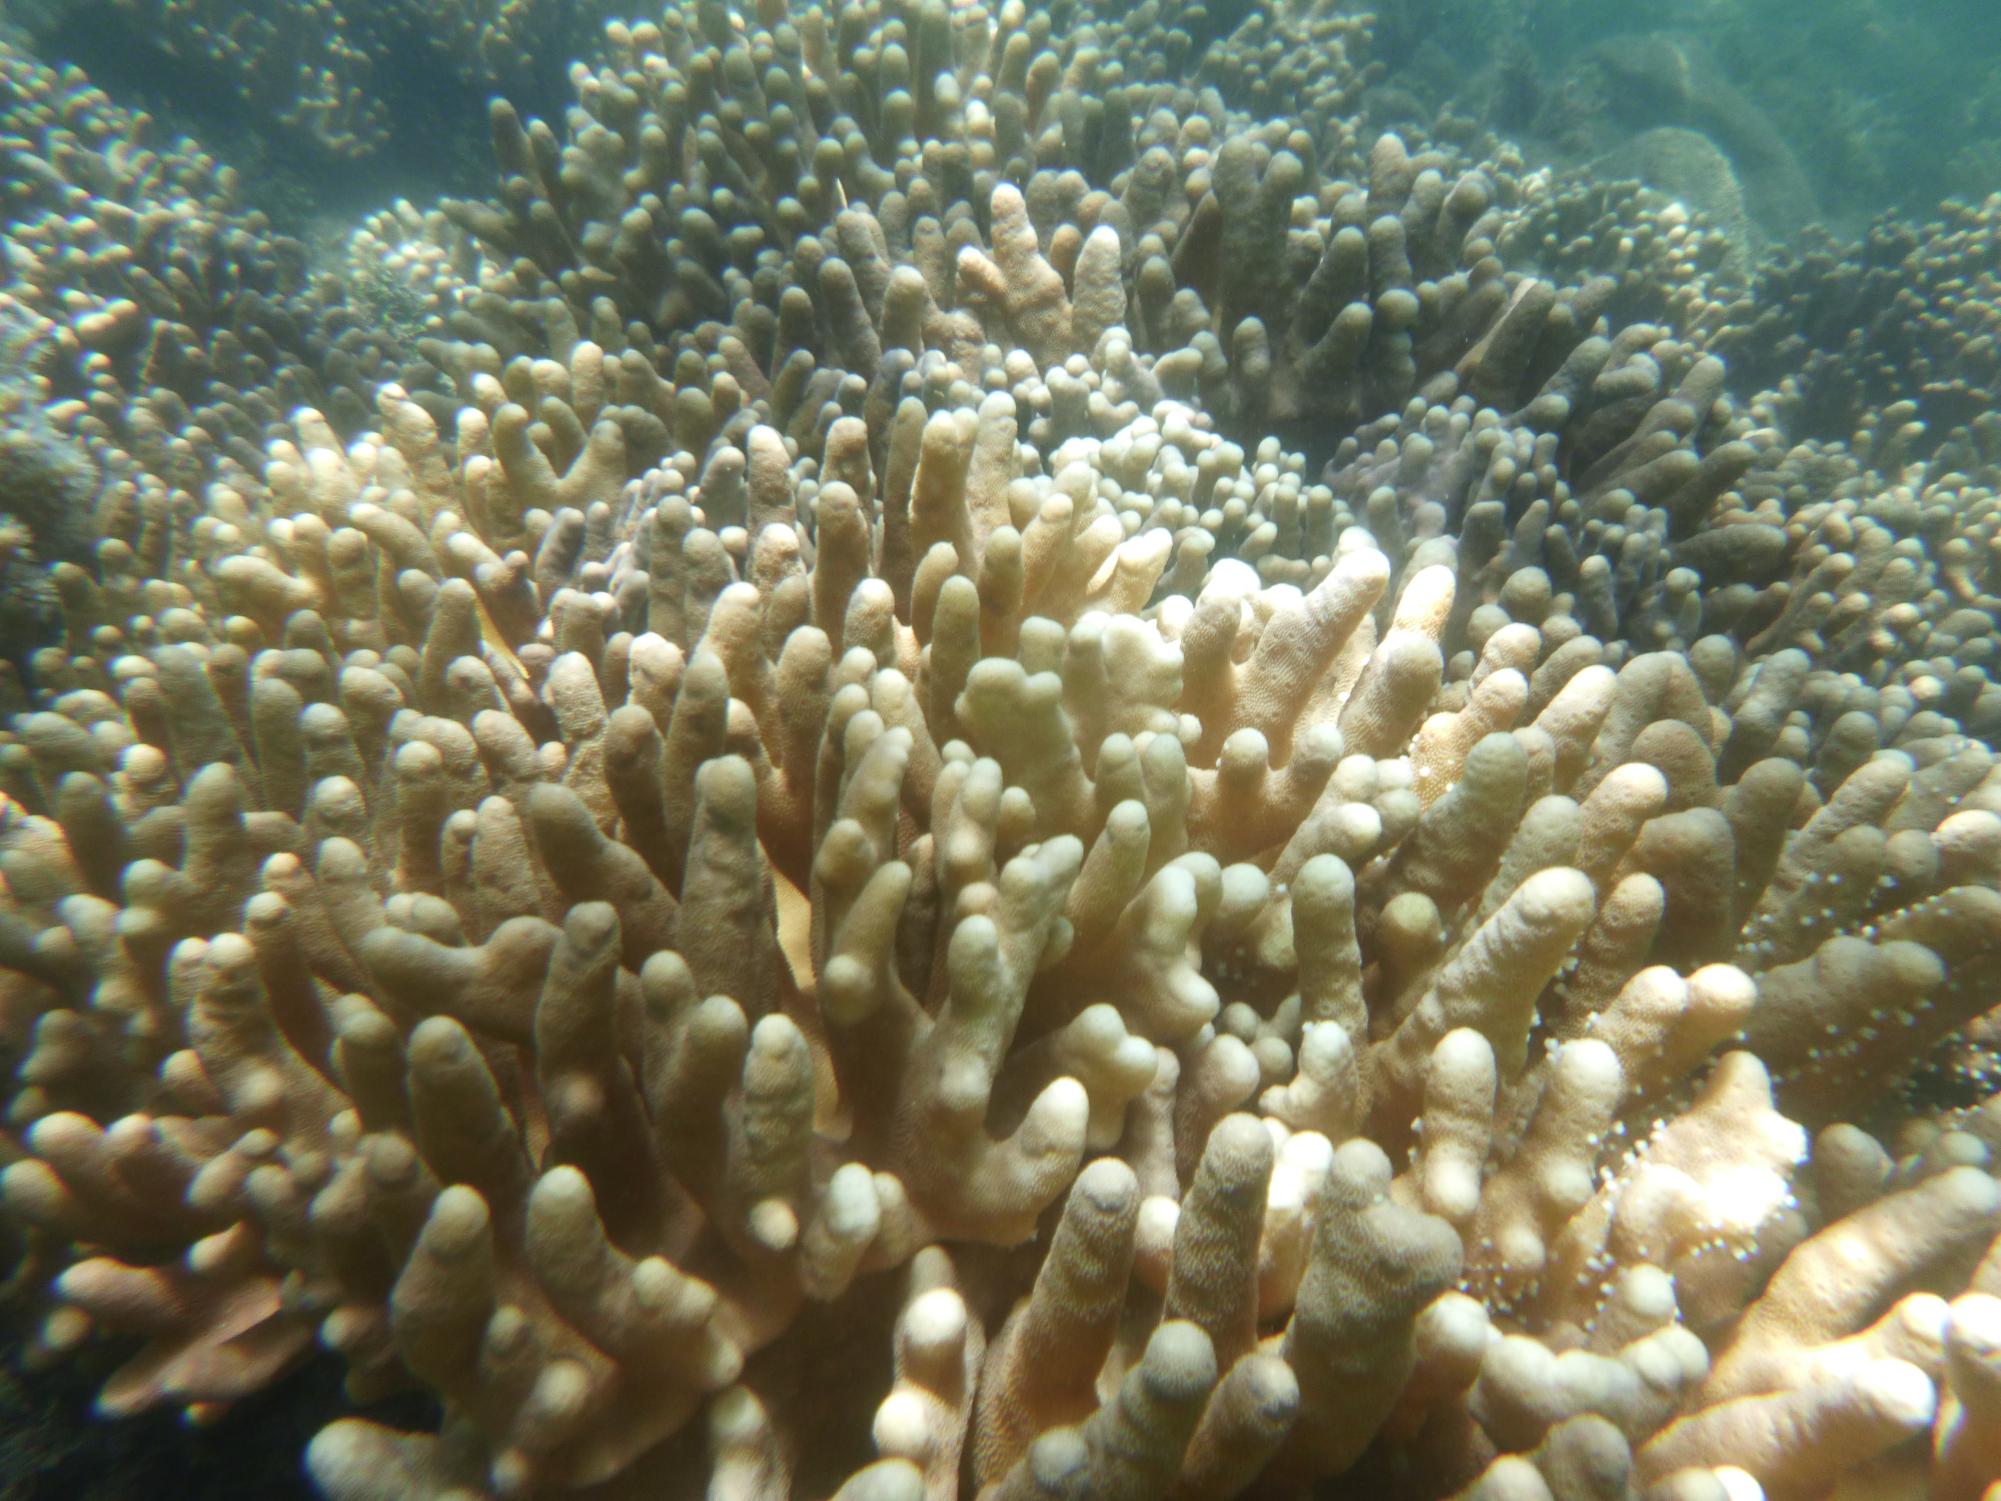 A photo of bleached coral